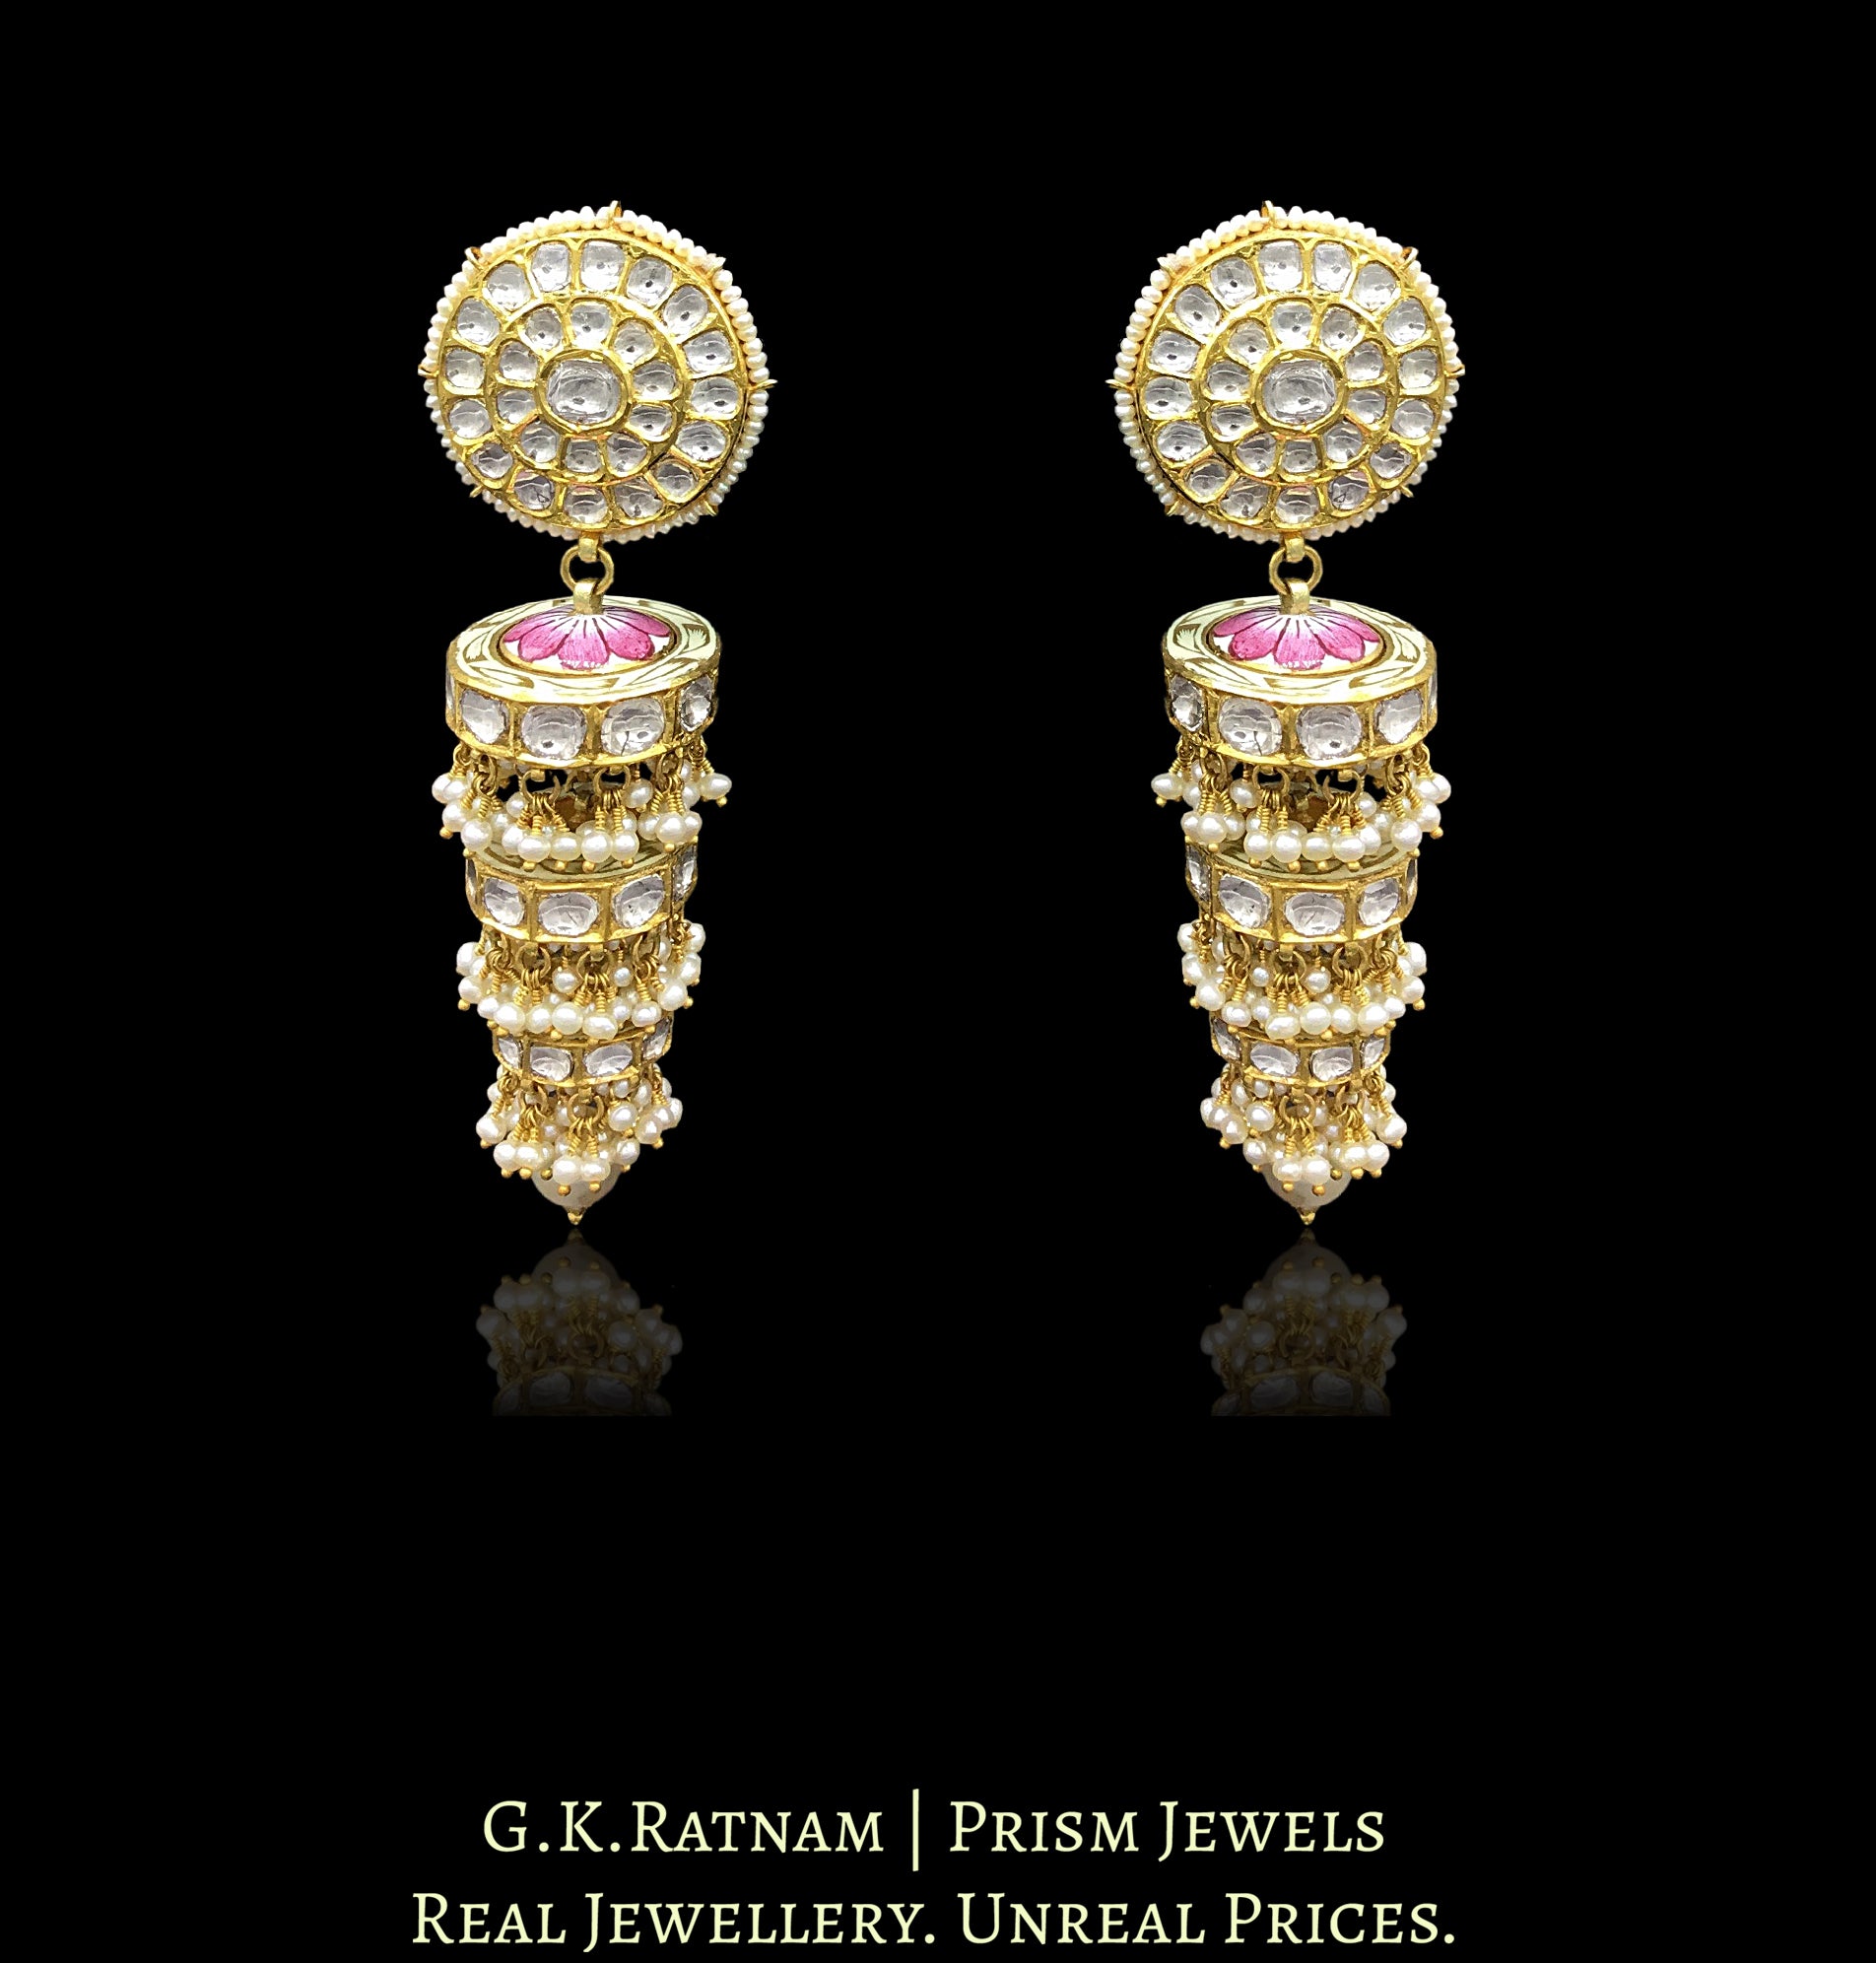 18k Gold and Diamond Polki Chandelier Earring Pair with disc-shaped rings